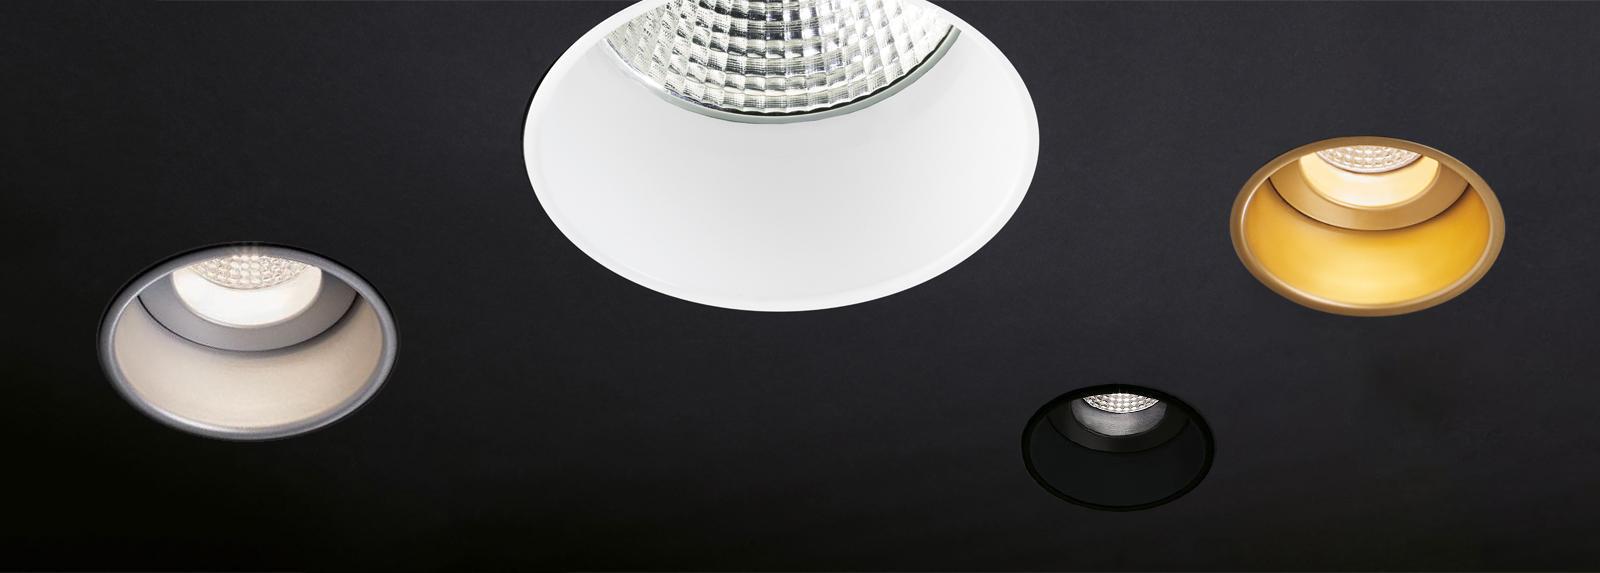 BSM | Trimless appearance recessed downlights